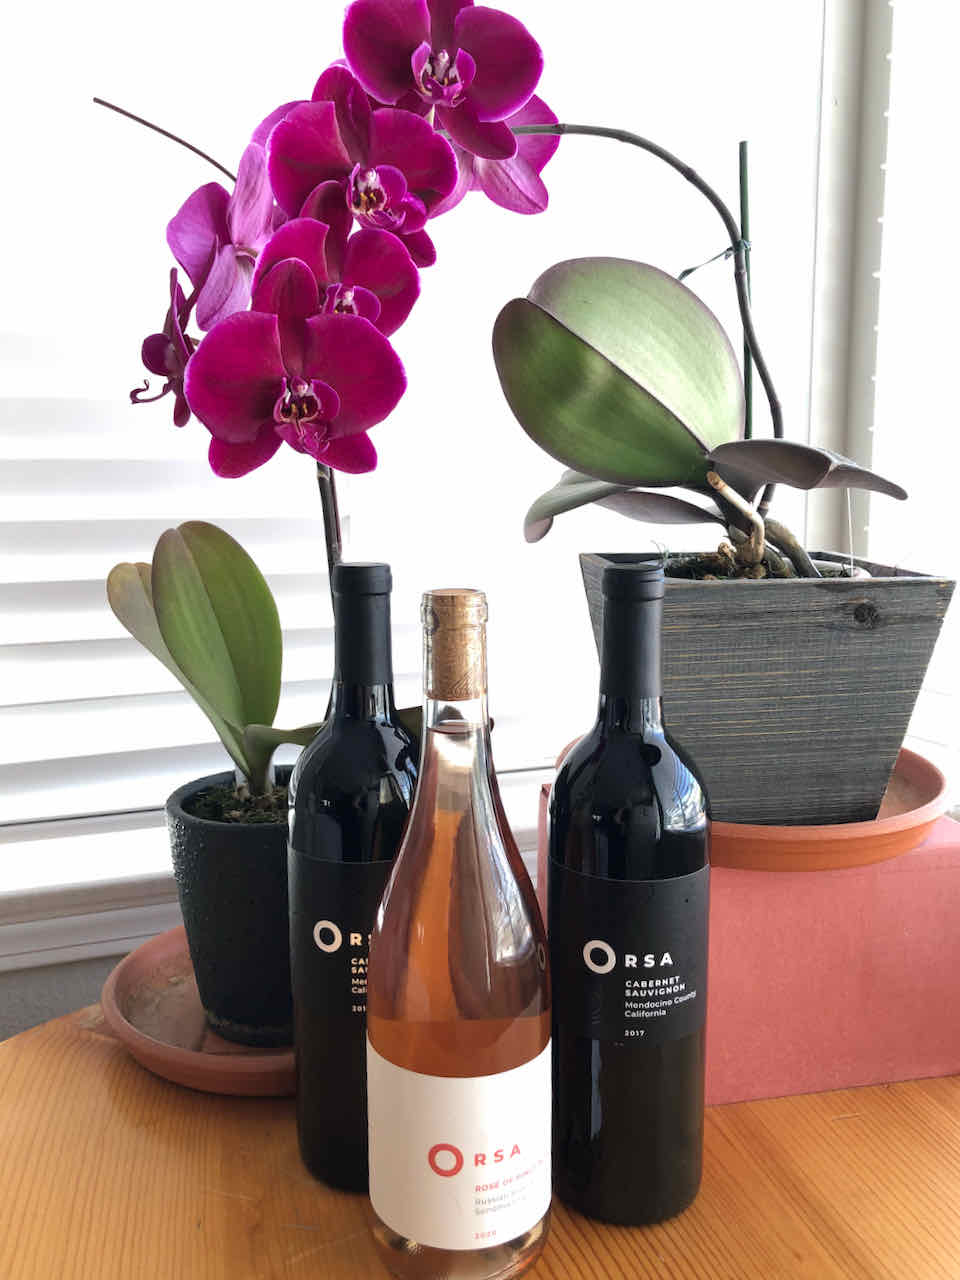 Orsa wines and orchids